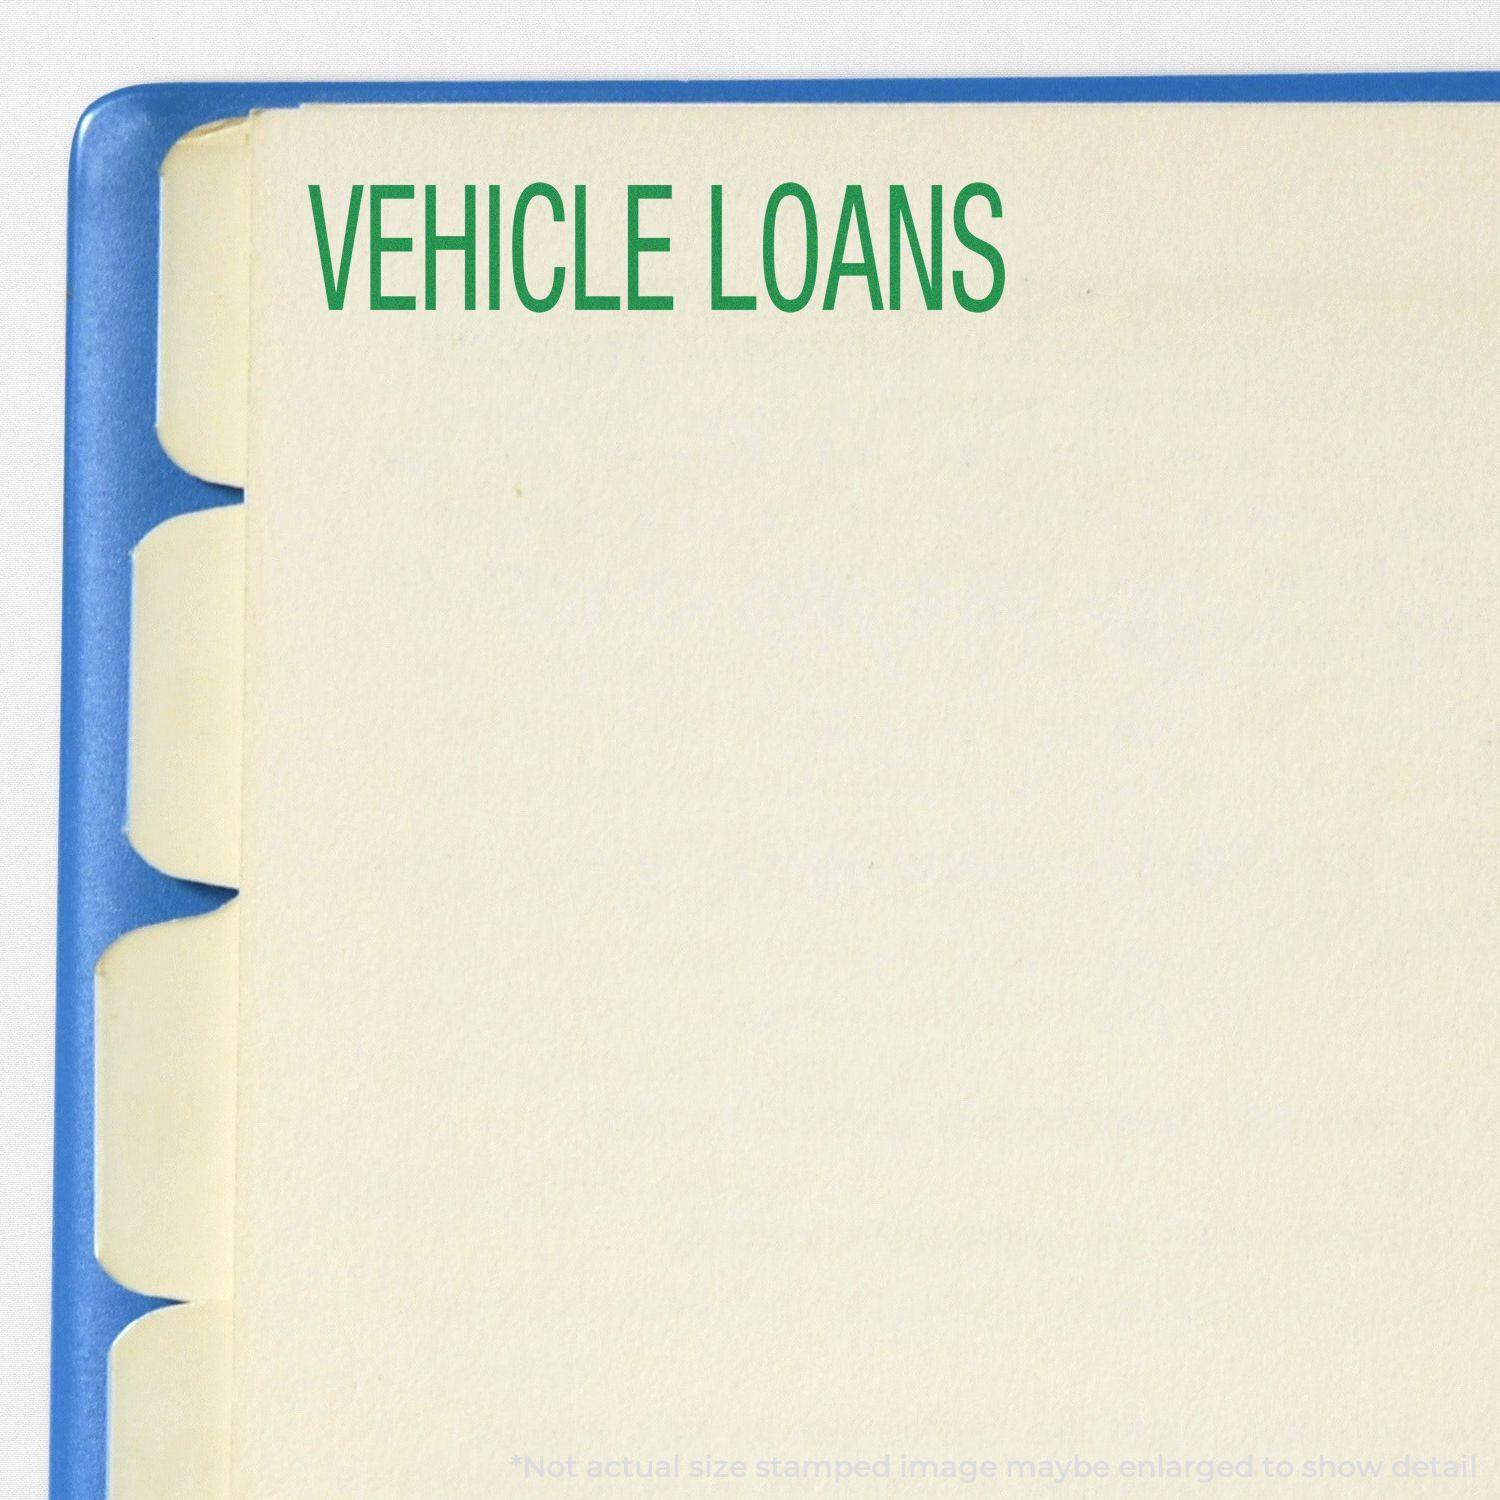 A self-inking stamp with a stamped image showing how the text "VEHICLE LOANS" is displayed after stamping.